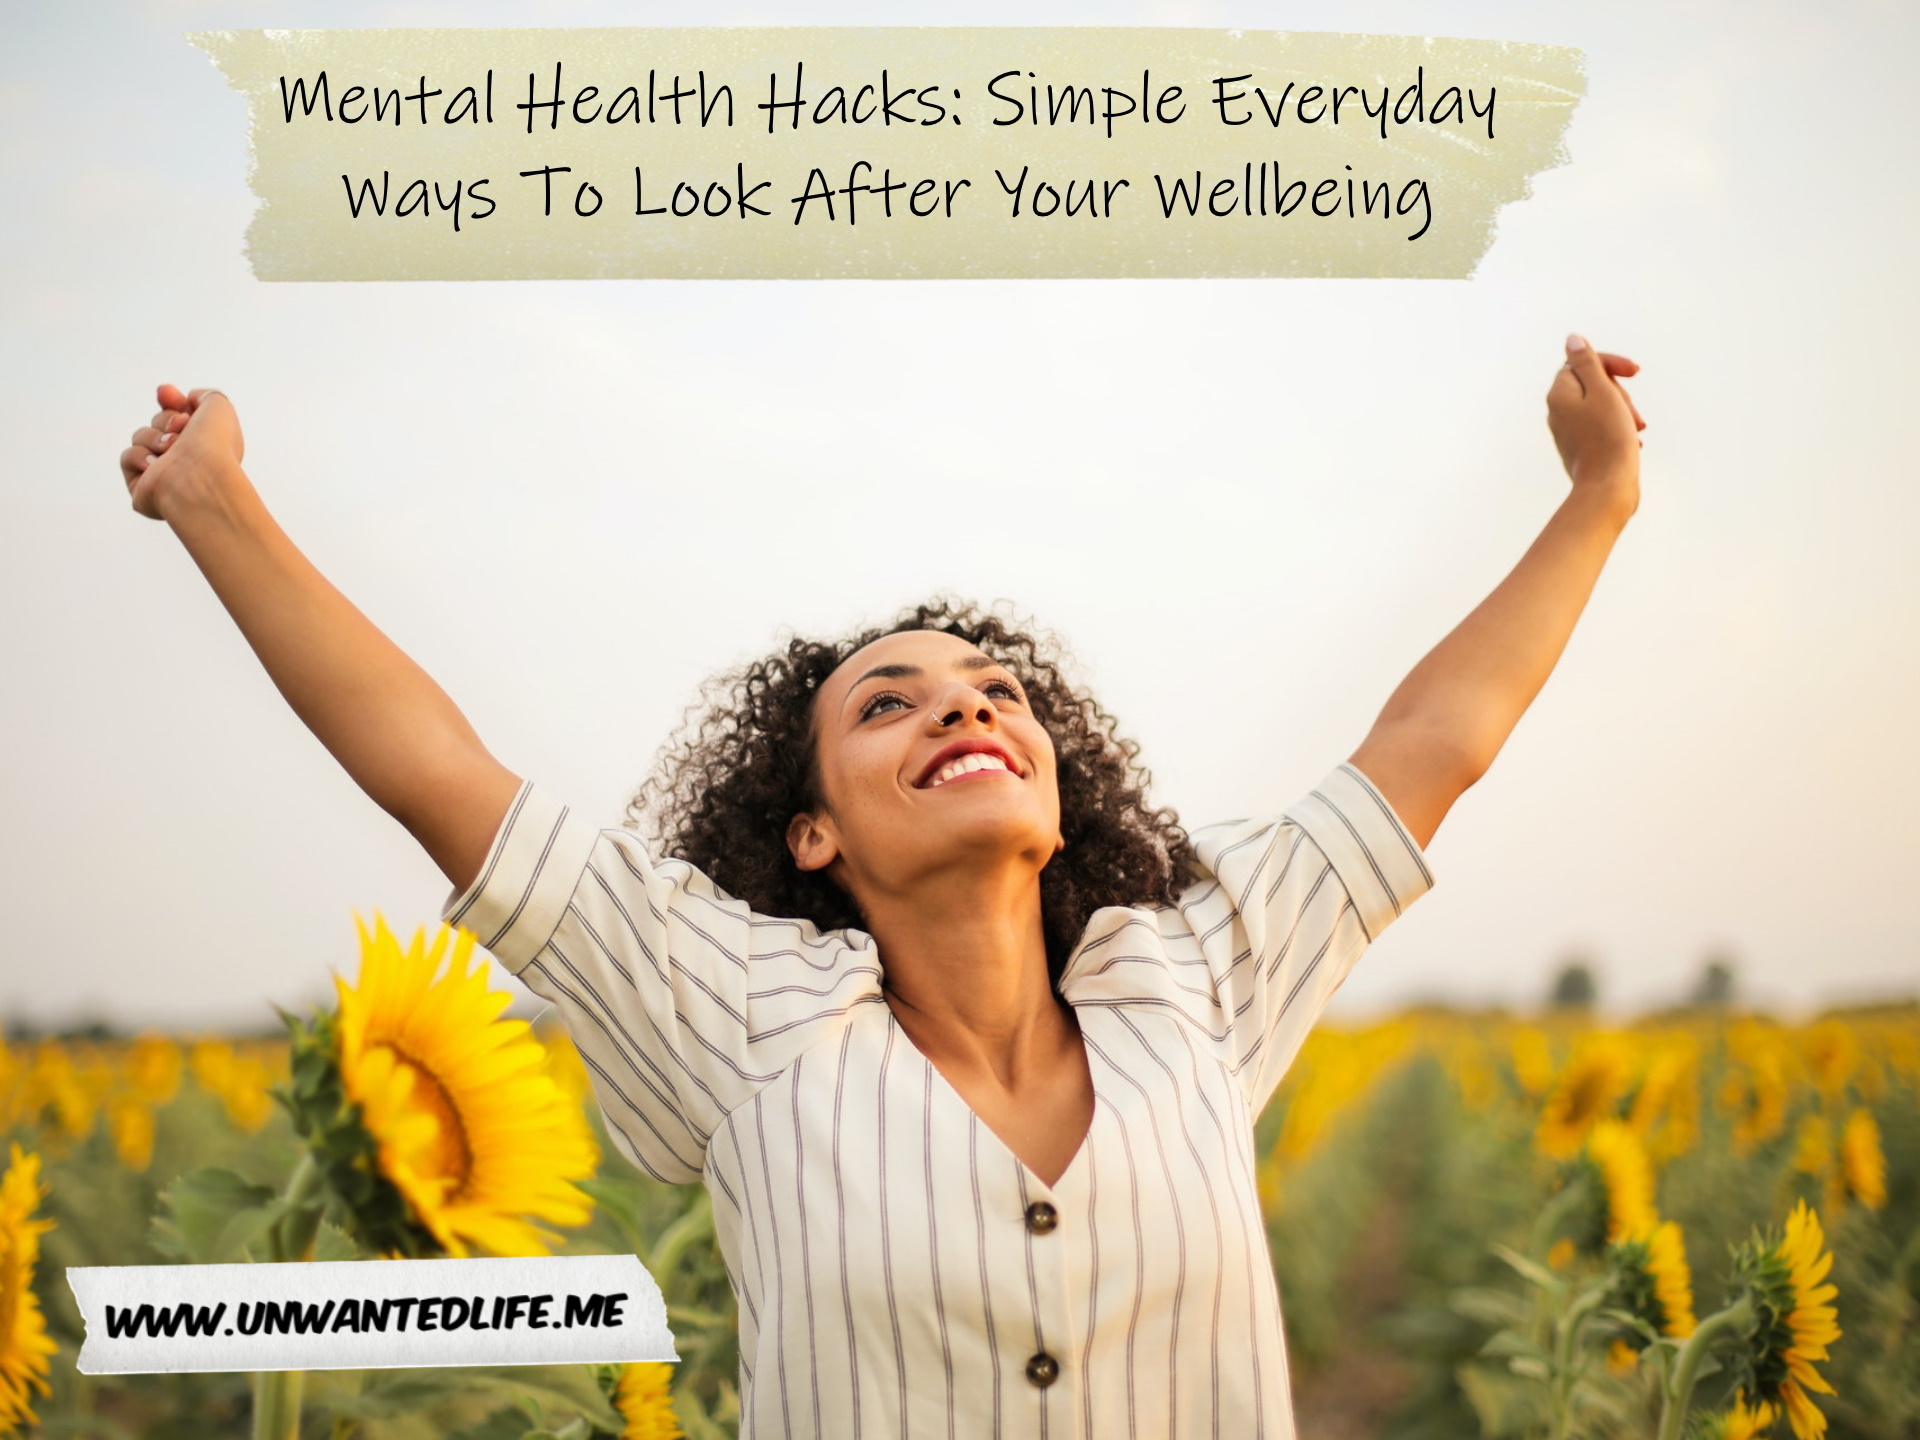 A photo of a Black woman with her arms raised in happiness while standing in a sunflower field to represent the topic of the article - Mental Health Hacks: Simple Everyday Ways To Look After Your Wellbeing - Unwanted Life